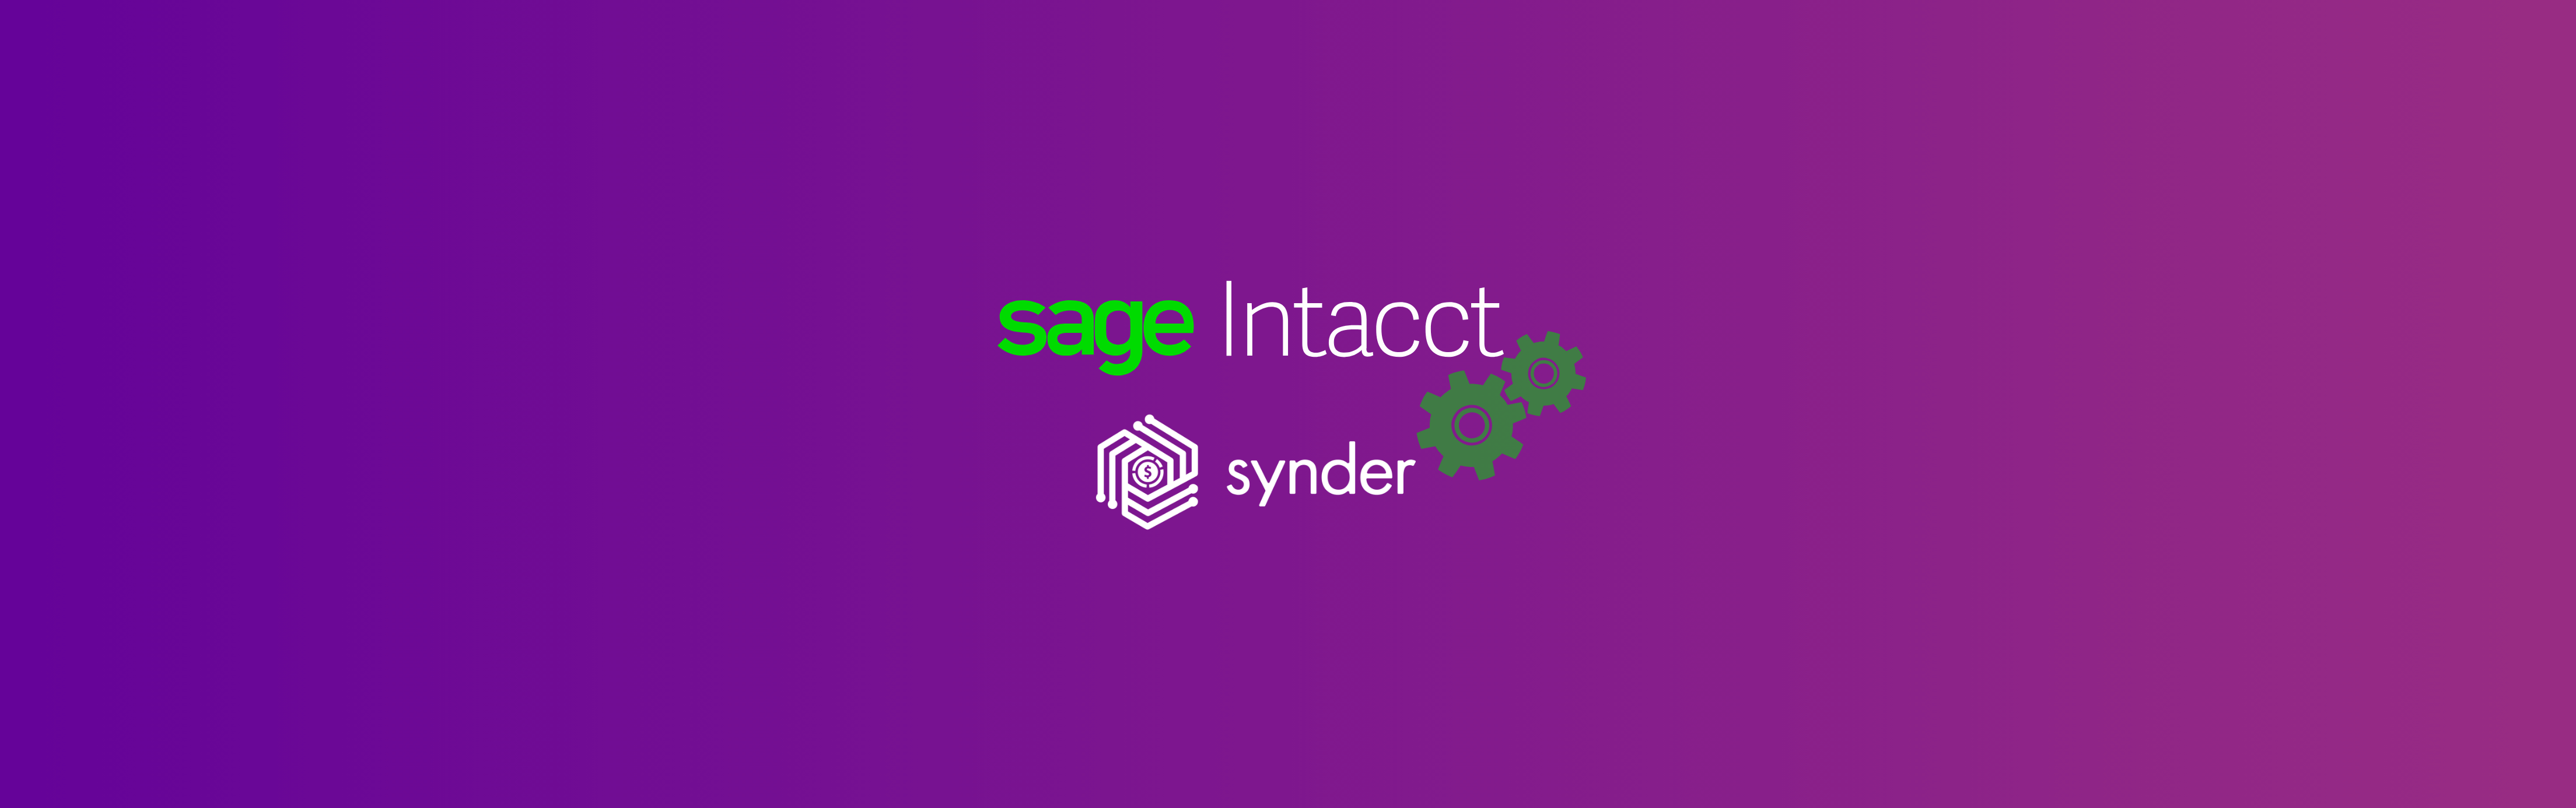 Synder and Sage Intacct: Integration to Drive Business Growth